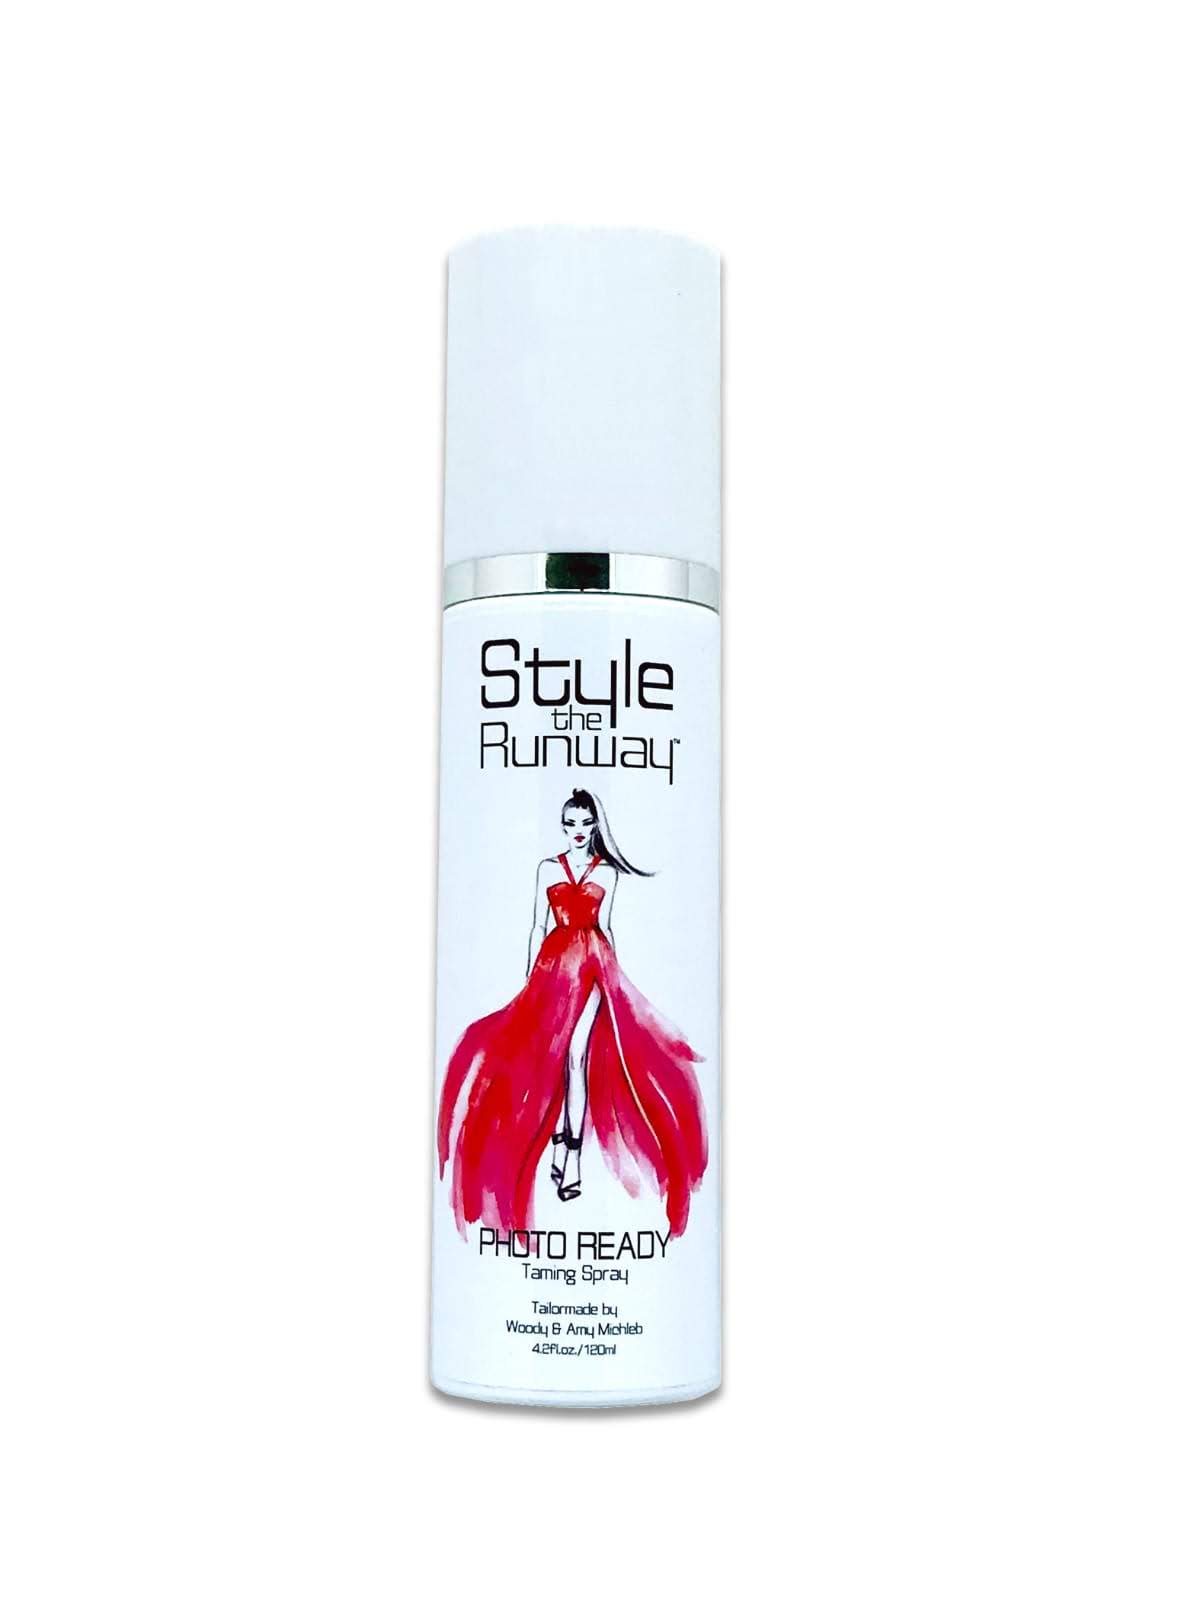 Photo Ready-Taming Spray by Style the Runway